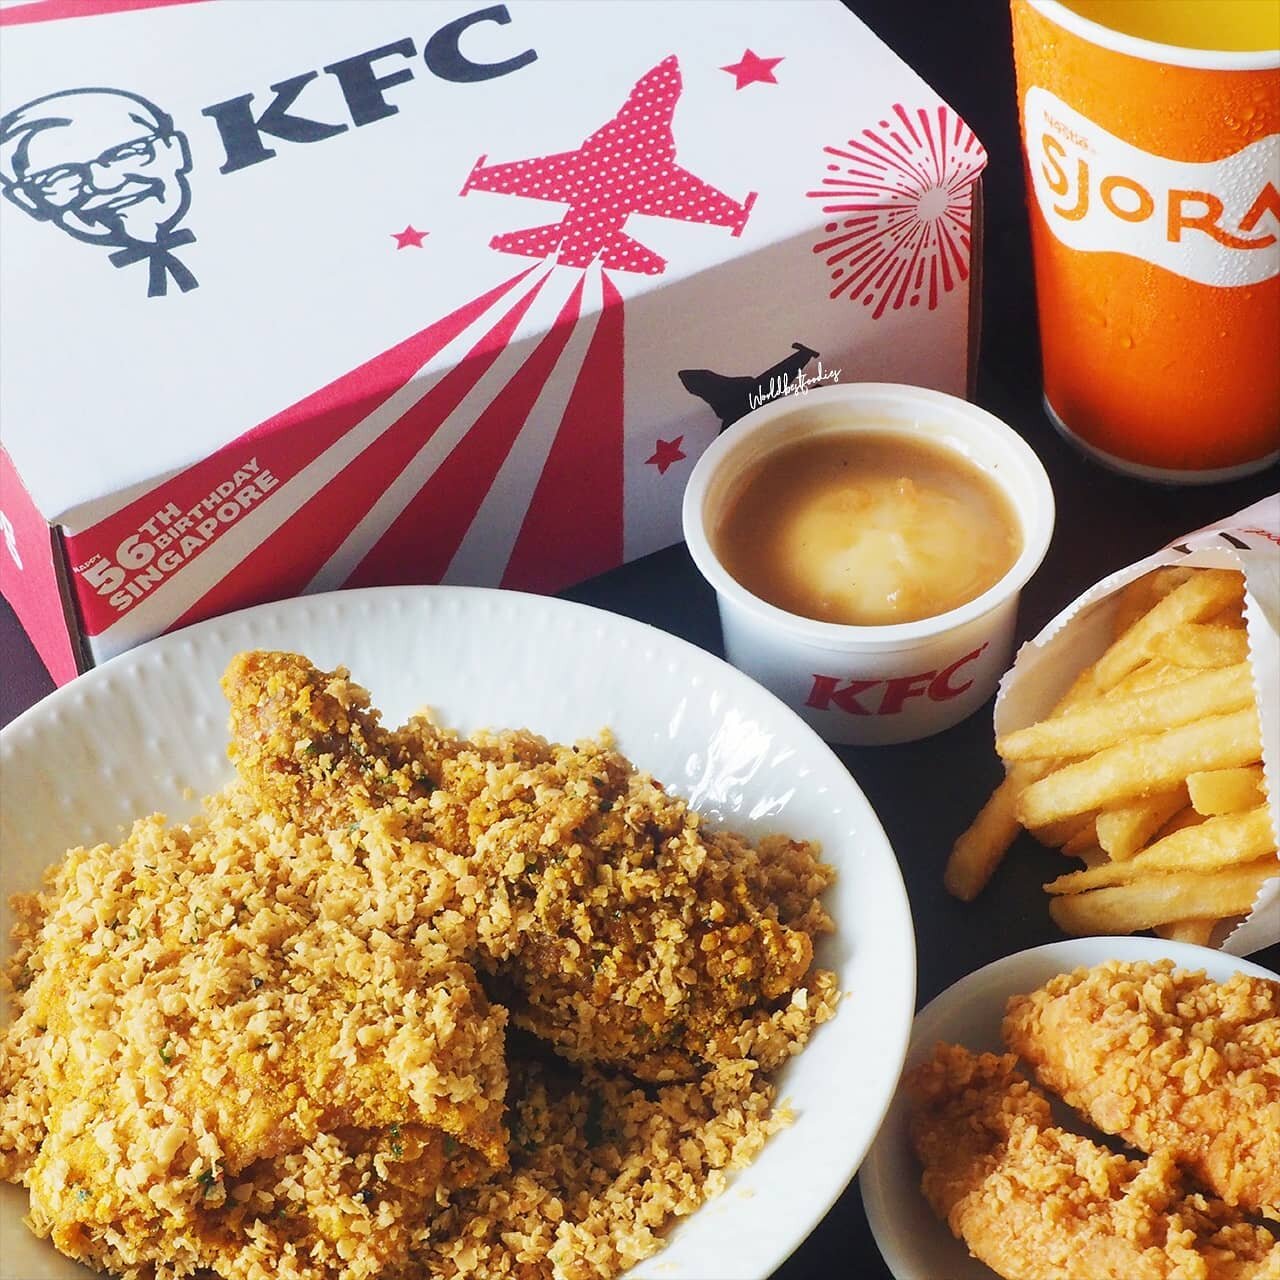 Cerealsly delicious creation from @kfc_sg.

The crunchy cereal was bursting in buttery and curry fragrance, well-balanced of sweet and savoury. The chicken are coated with special spices to add a hint of spiciness. Featuring Cereal Box in 1st photo (